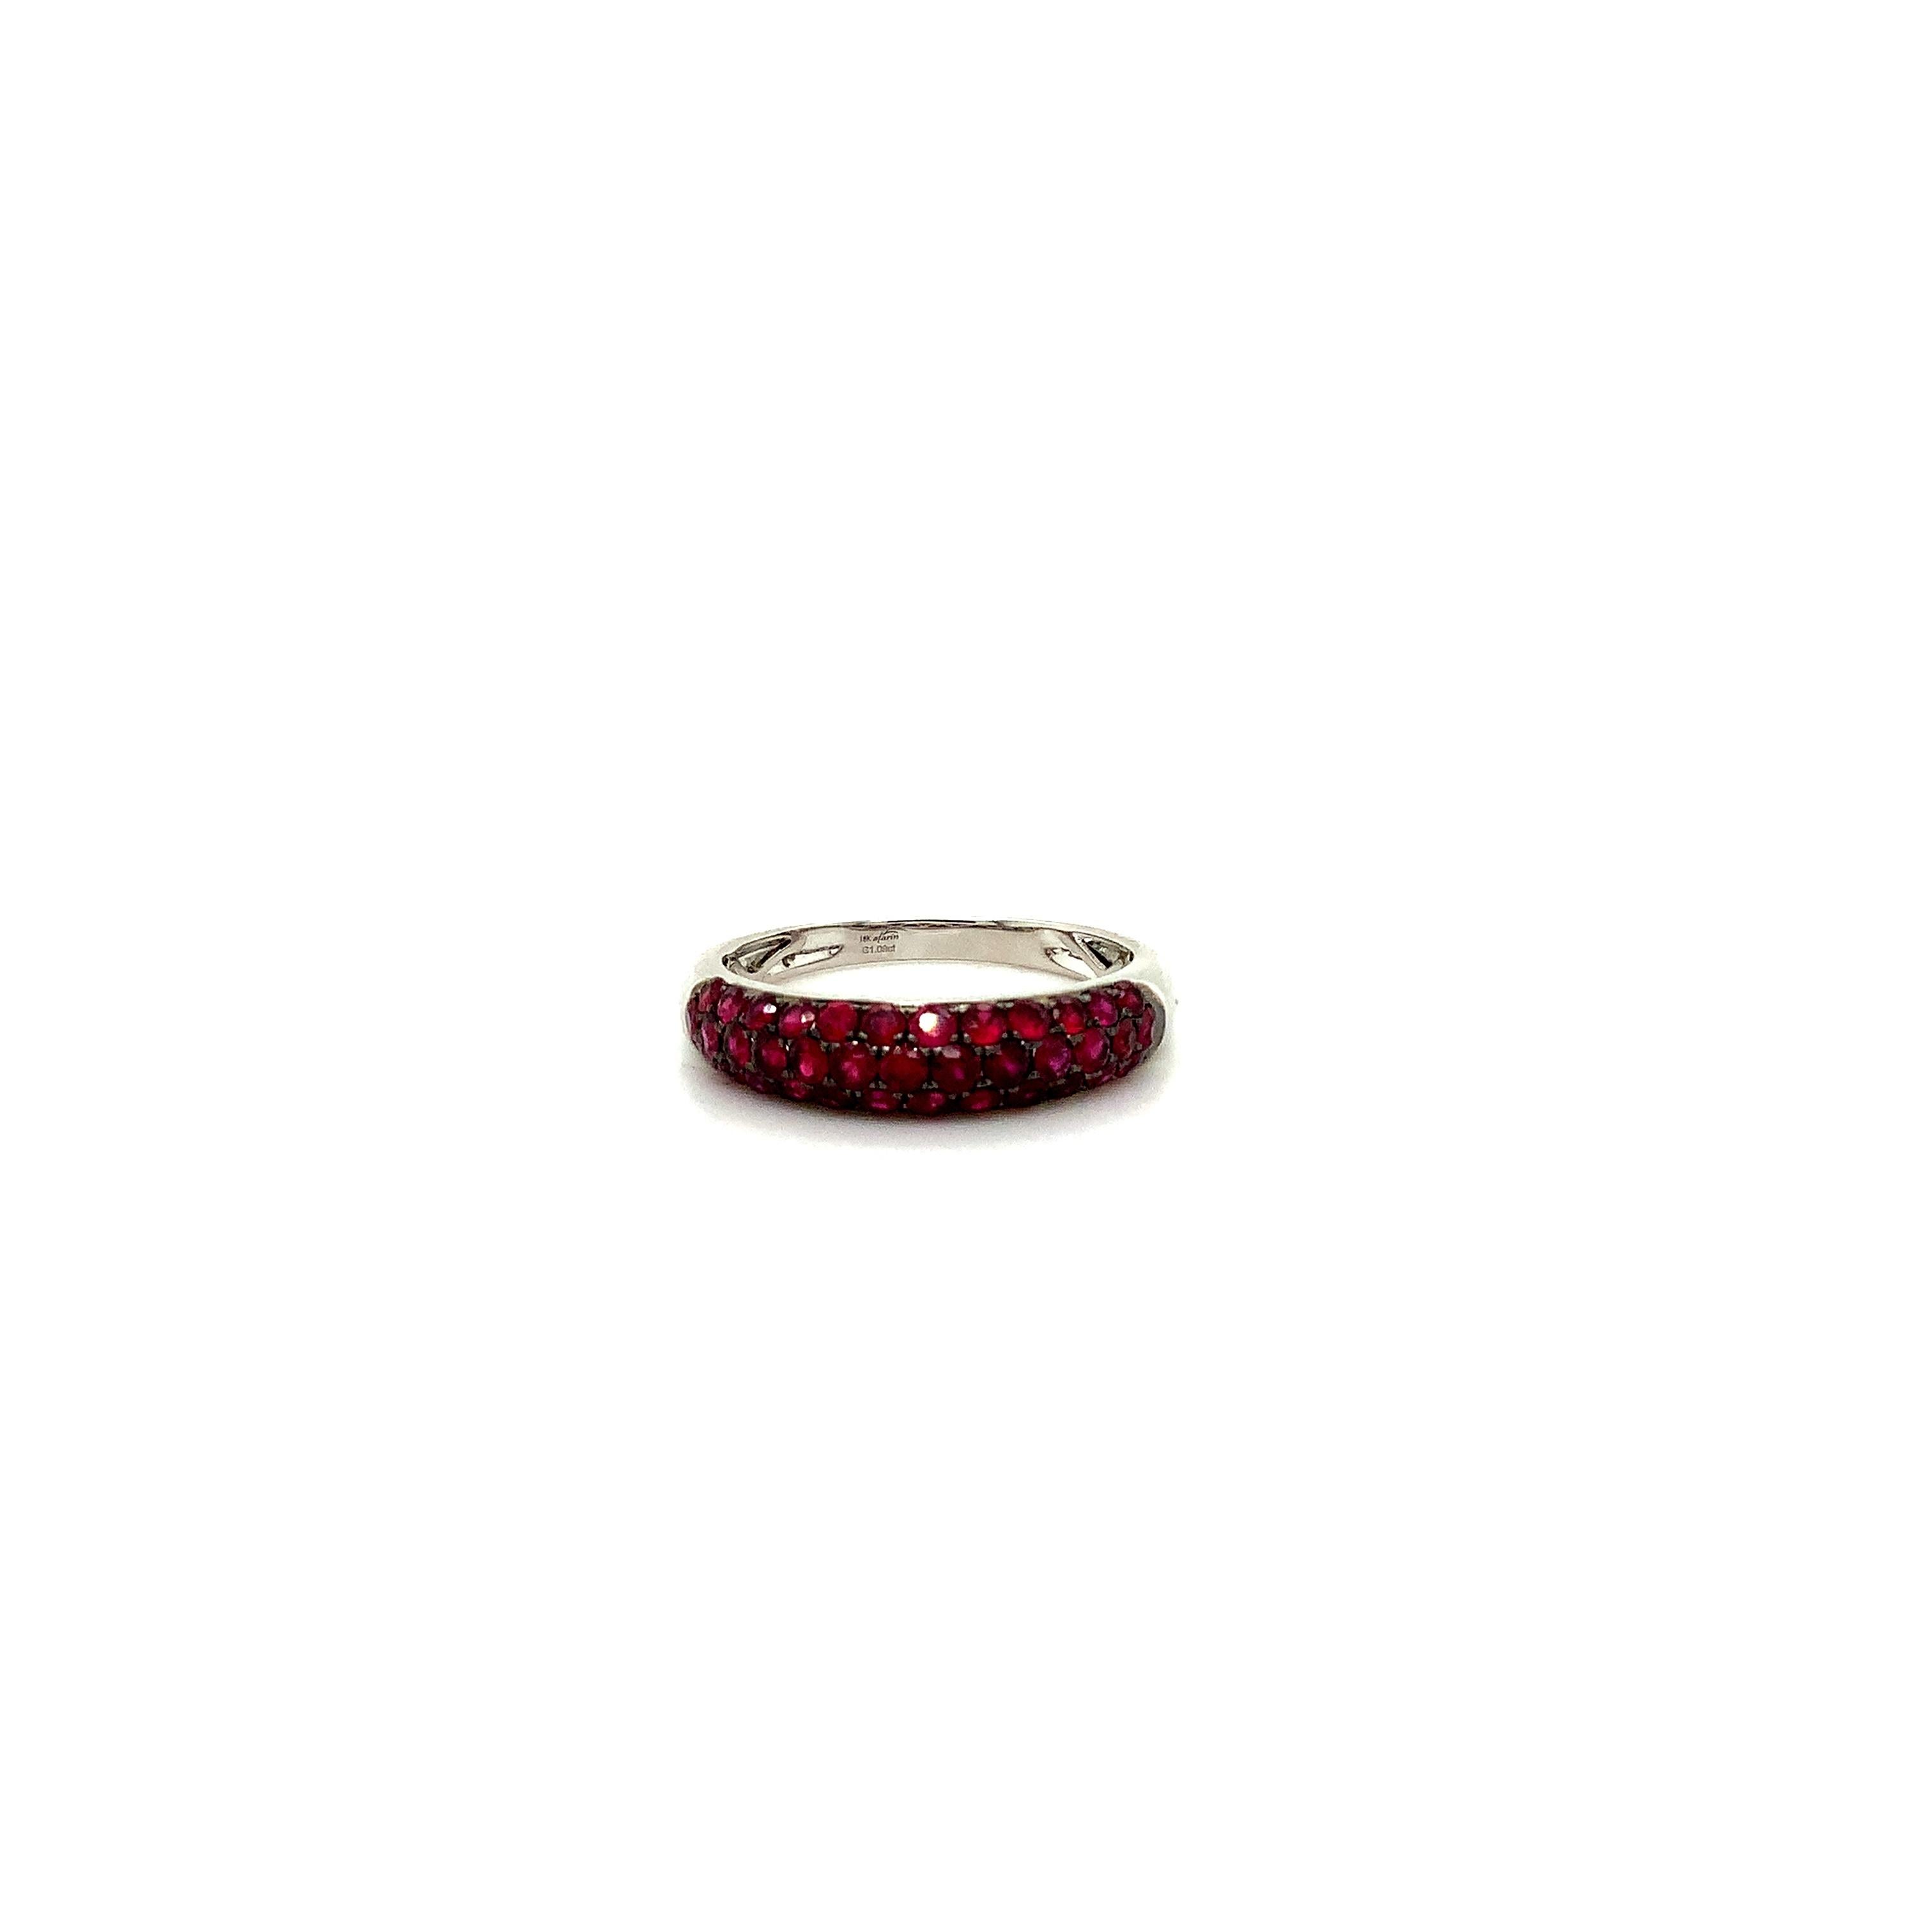 This elegant ring from Afarin Collection showcases a 3-row design, with a domed shape and graduating pavé rubies. The band is crafted in 18K white gold and finished with black rhodium. The vibrant rubies, totaling 1.09 carats, gradually increase in